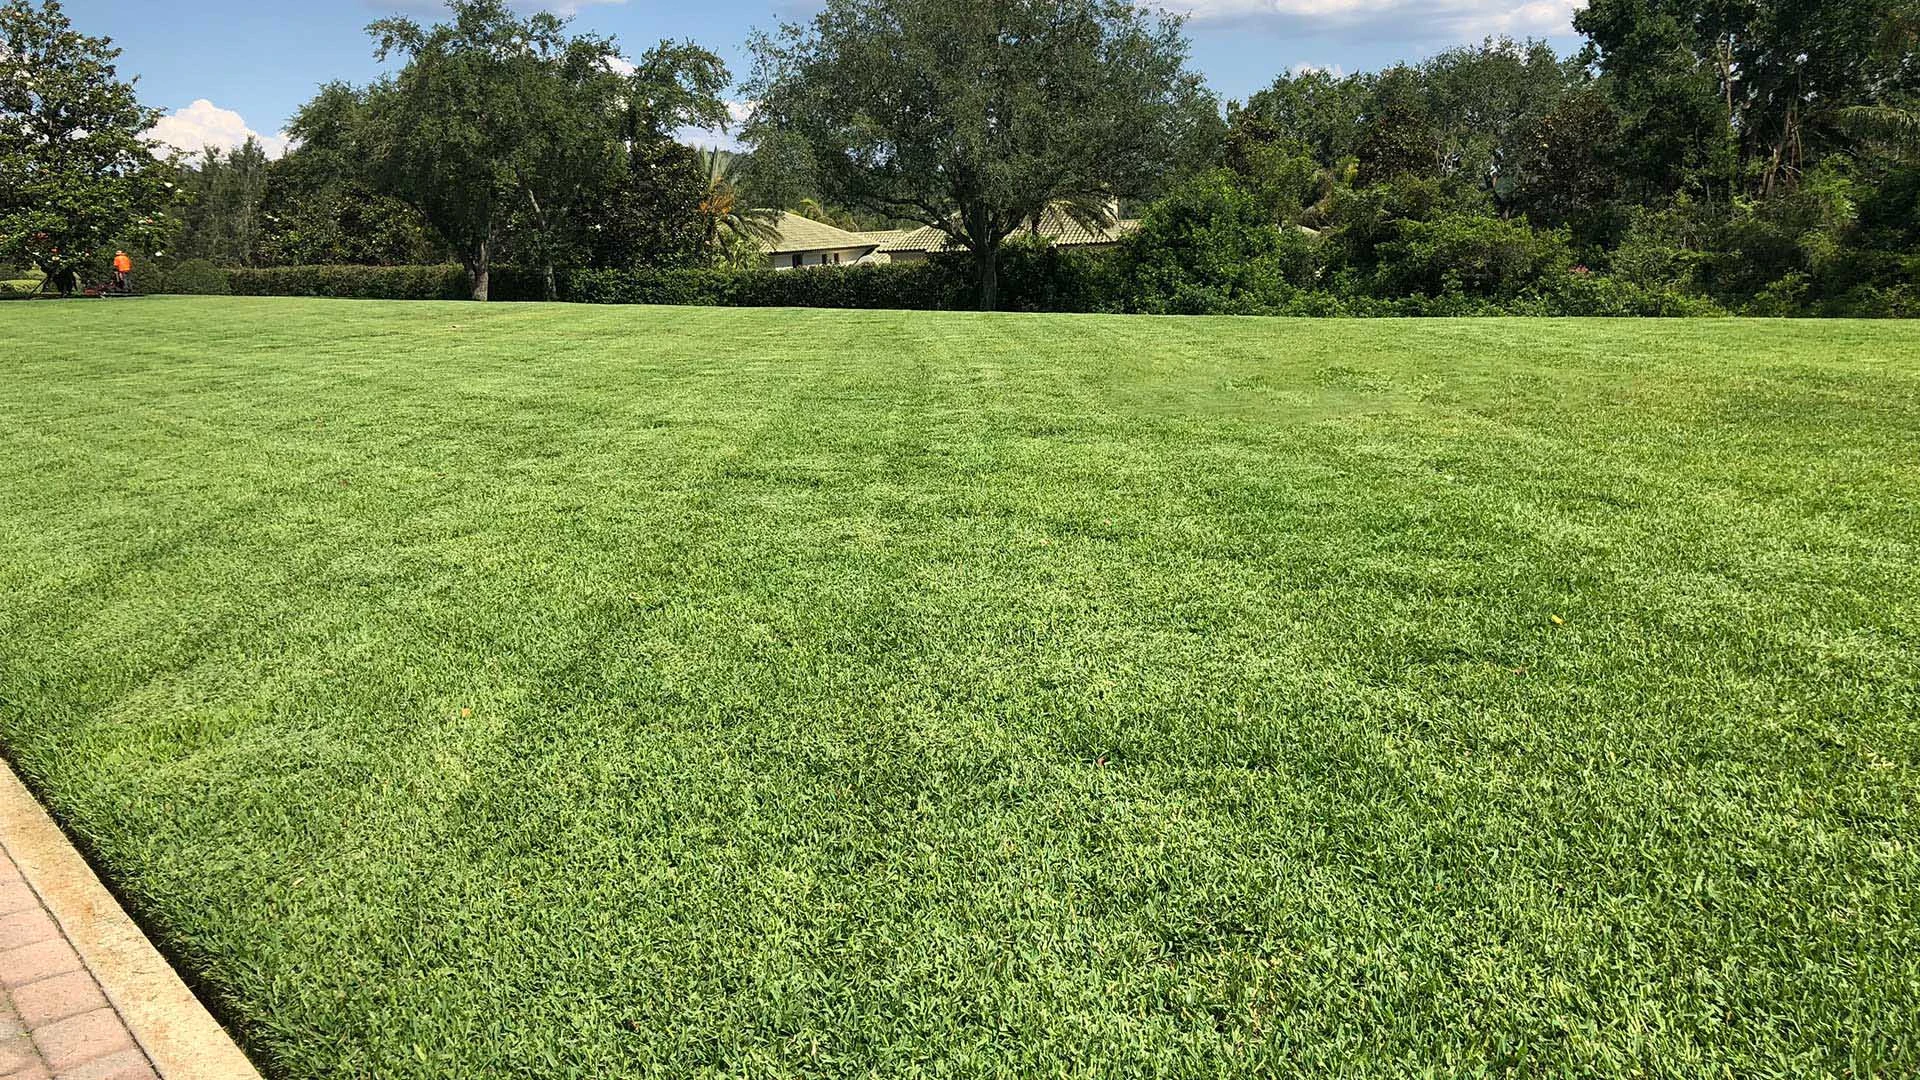 Green, fertilized, healthy, and well maintained lawn at a home in Highland City, FL.